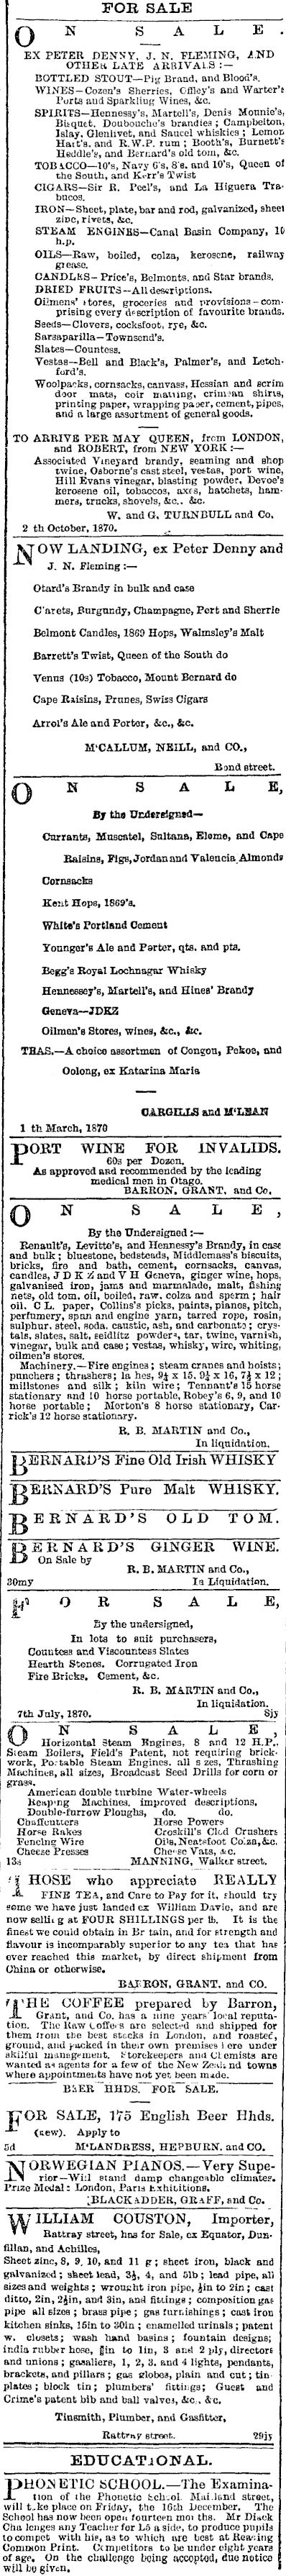 Papers | Newspapers | Otago Daily Times 14 December 1870 | Page 4 Advertisements Column 4